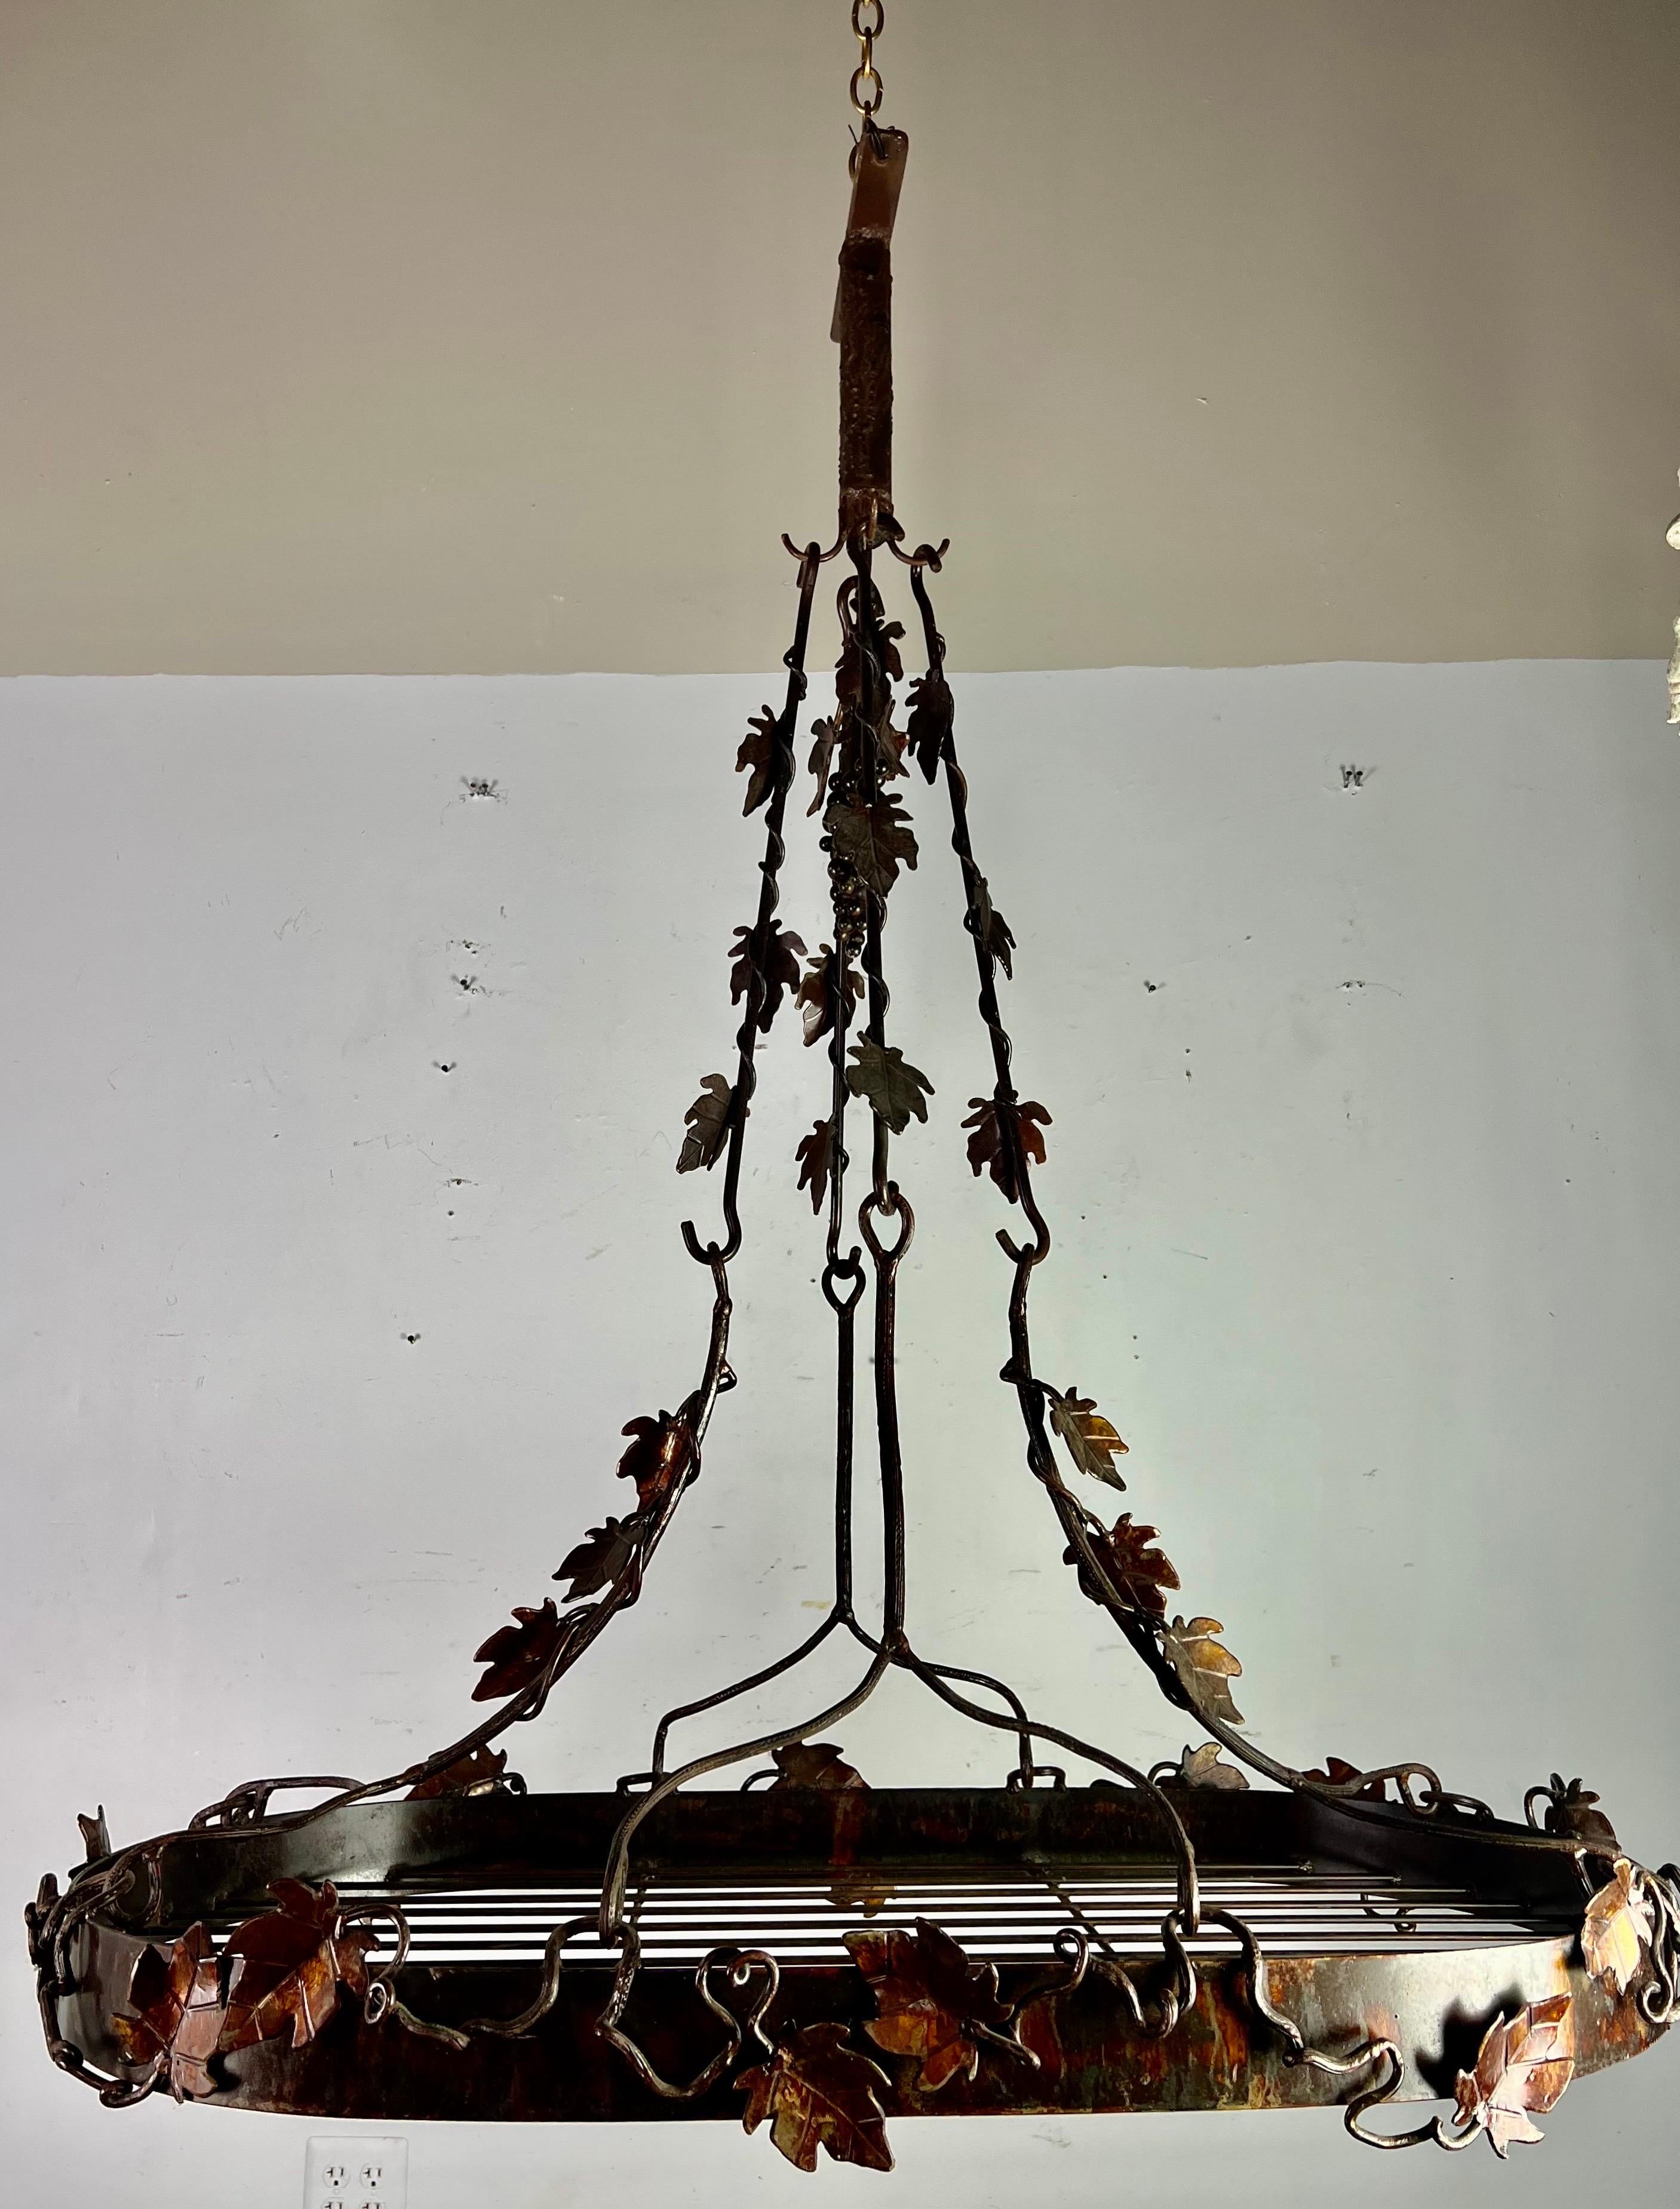 20th Century hand forged wrought iron pot rack with decorative vines and leaves throughout. It was hand made out of iron and finished with a hint of copper color to give a radiant glow and coordinate with your copper pots.